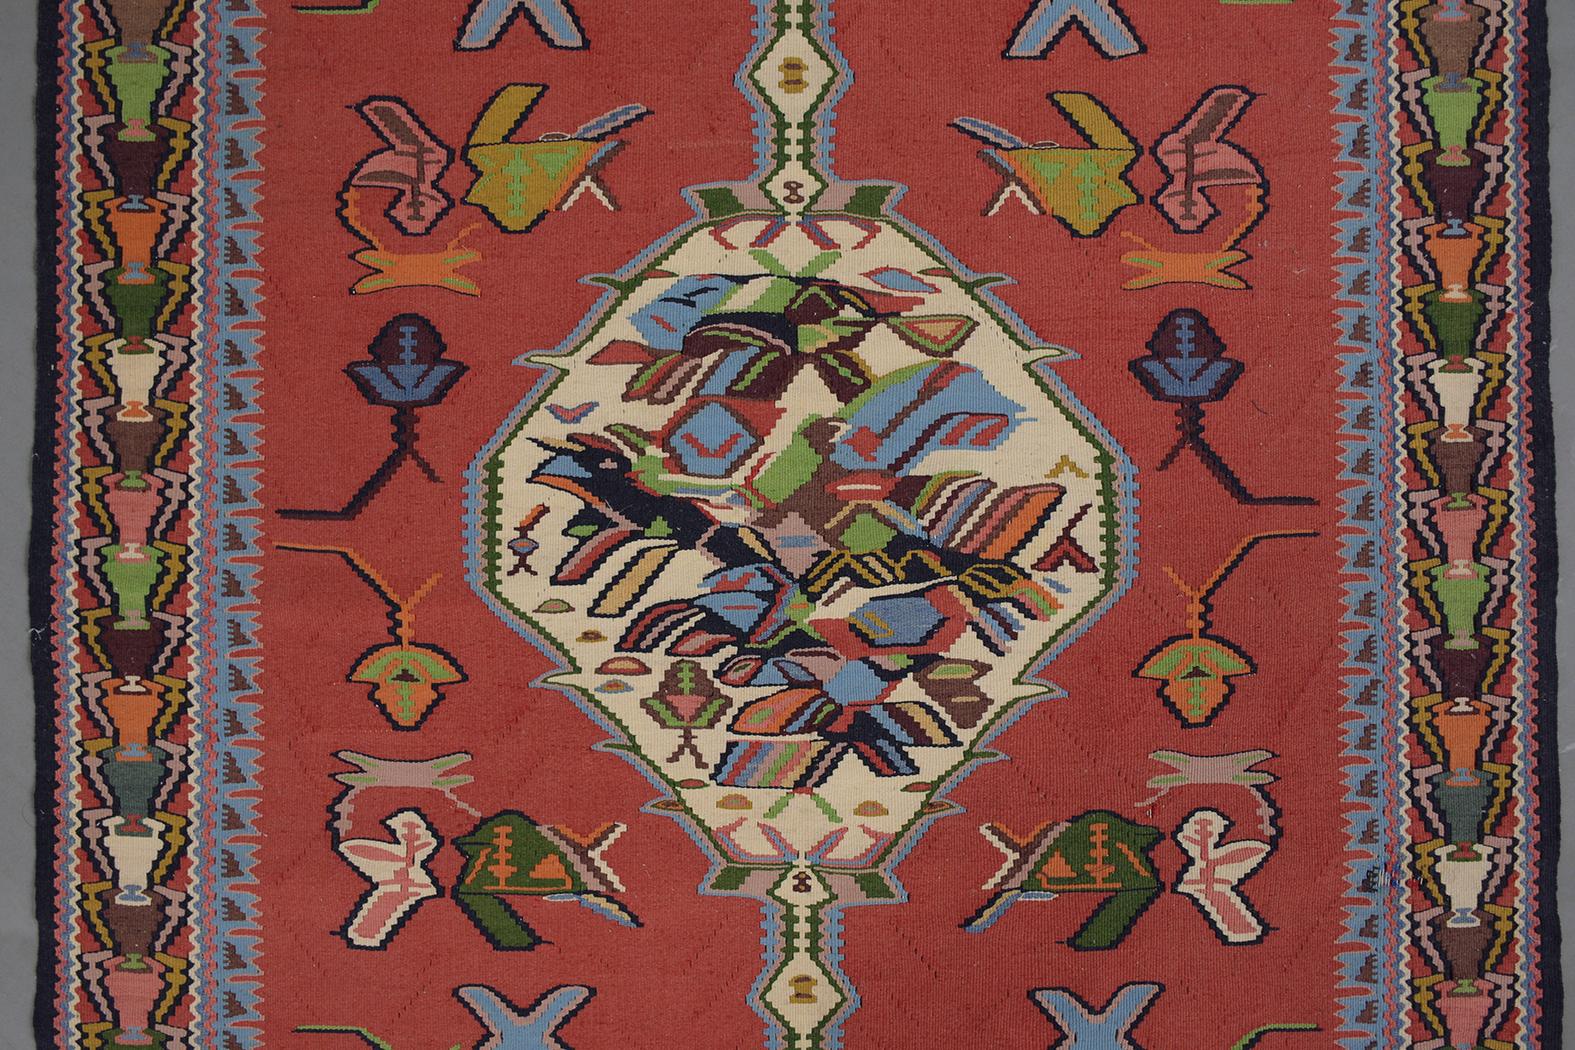 Discover a piece of Native American artistry with this antique handwoven Navajo transitional rug, dating back to circa 1900. Crafted meticulously from wool, this rug showcases traditional stepped cross-shapes and hooks masterfully set against a